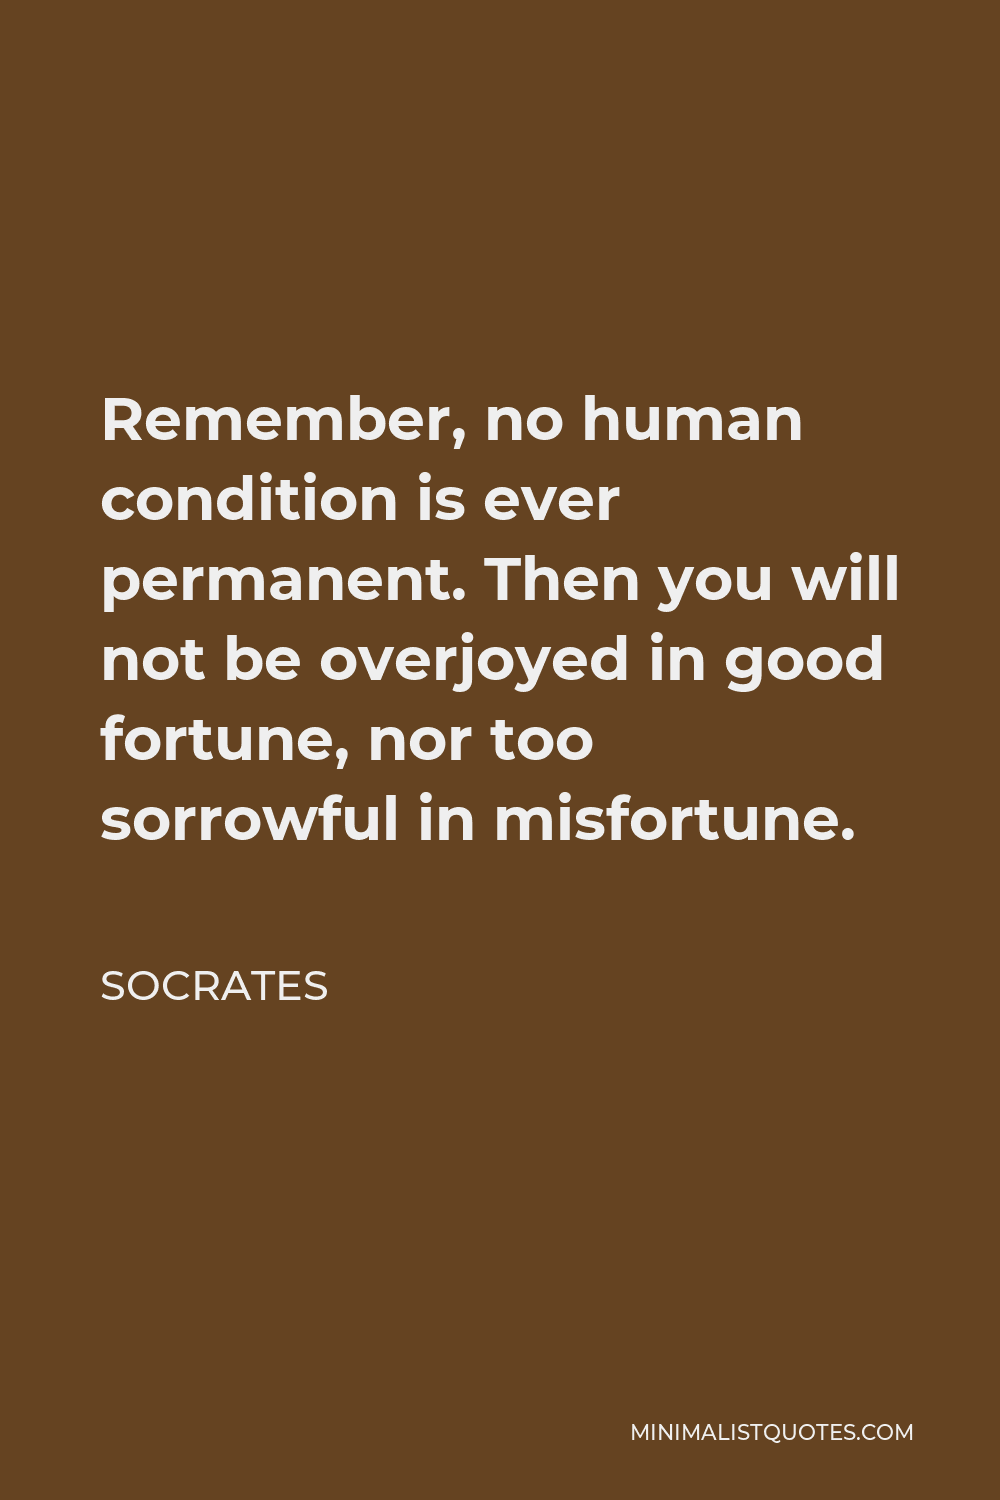 Socrates Quote - Remember, no human condition is ever permanent. Then you will not be overjoyed in good fortune, nor too sorrowful in misfortune.